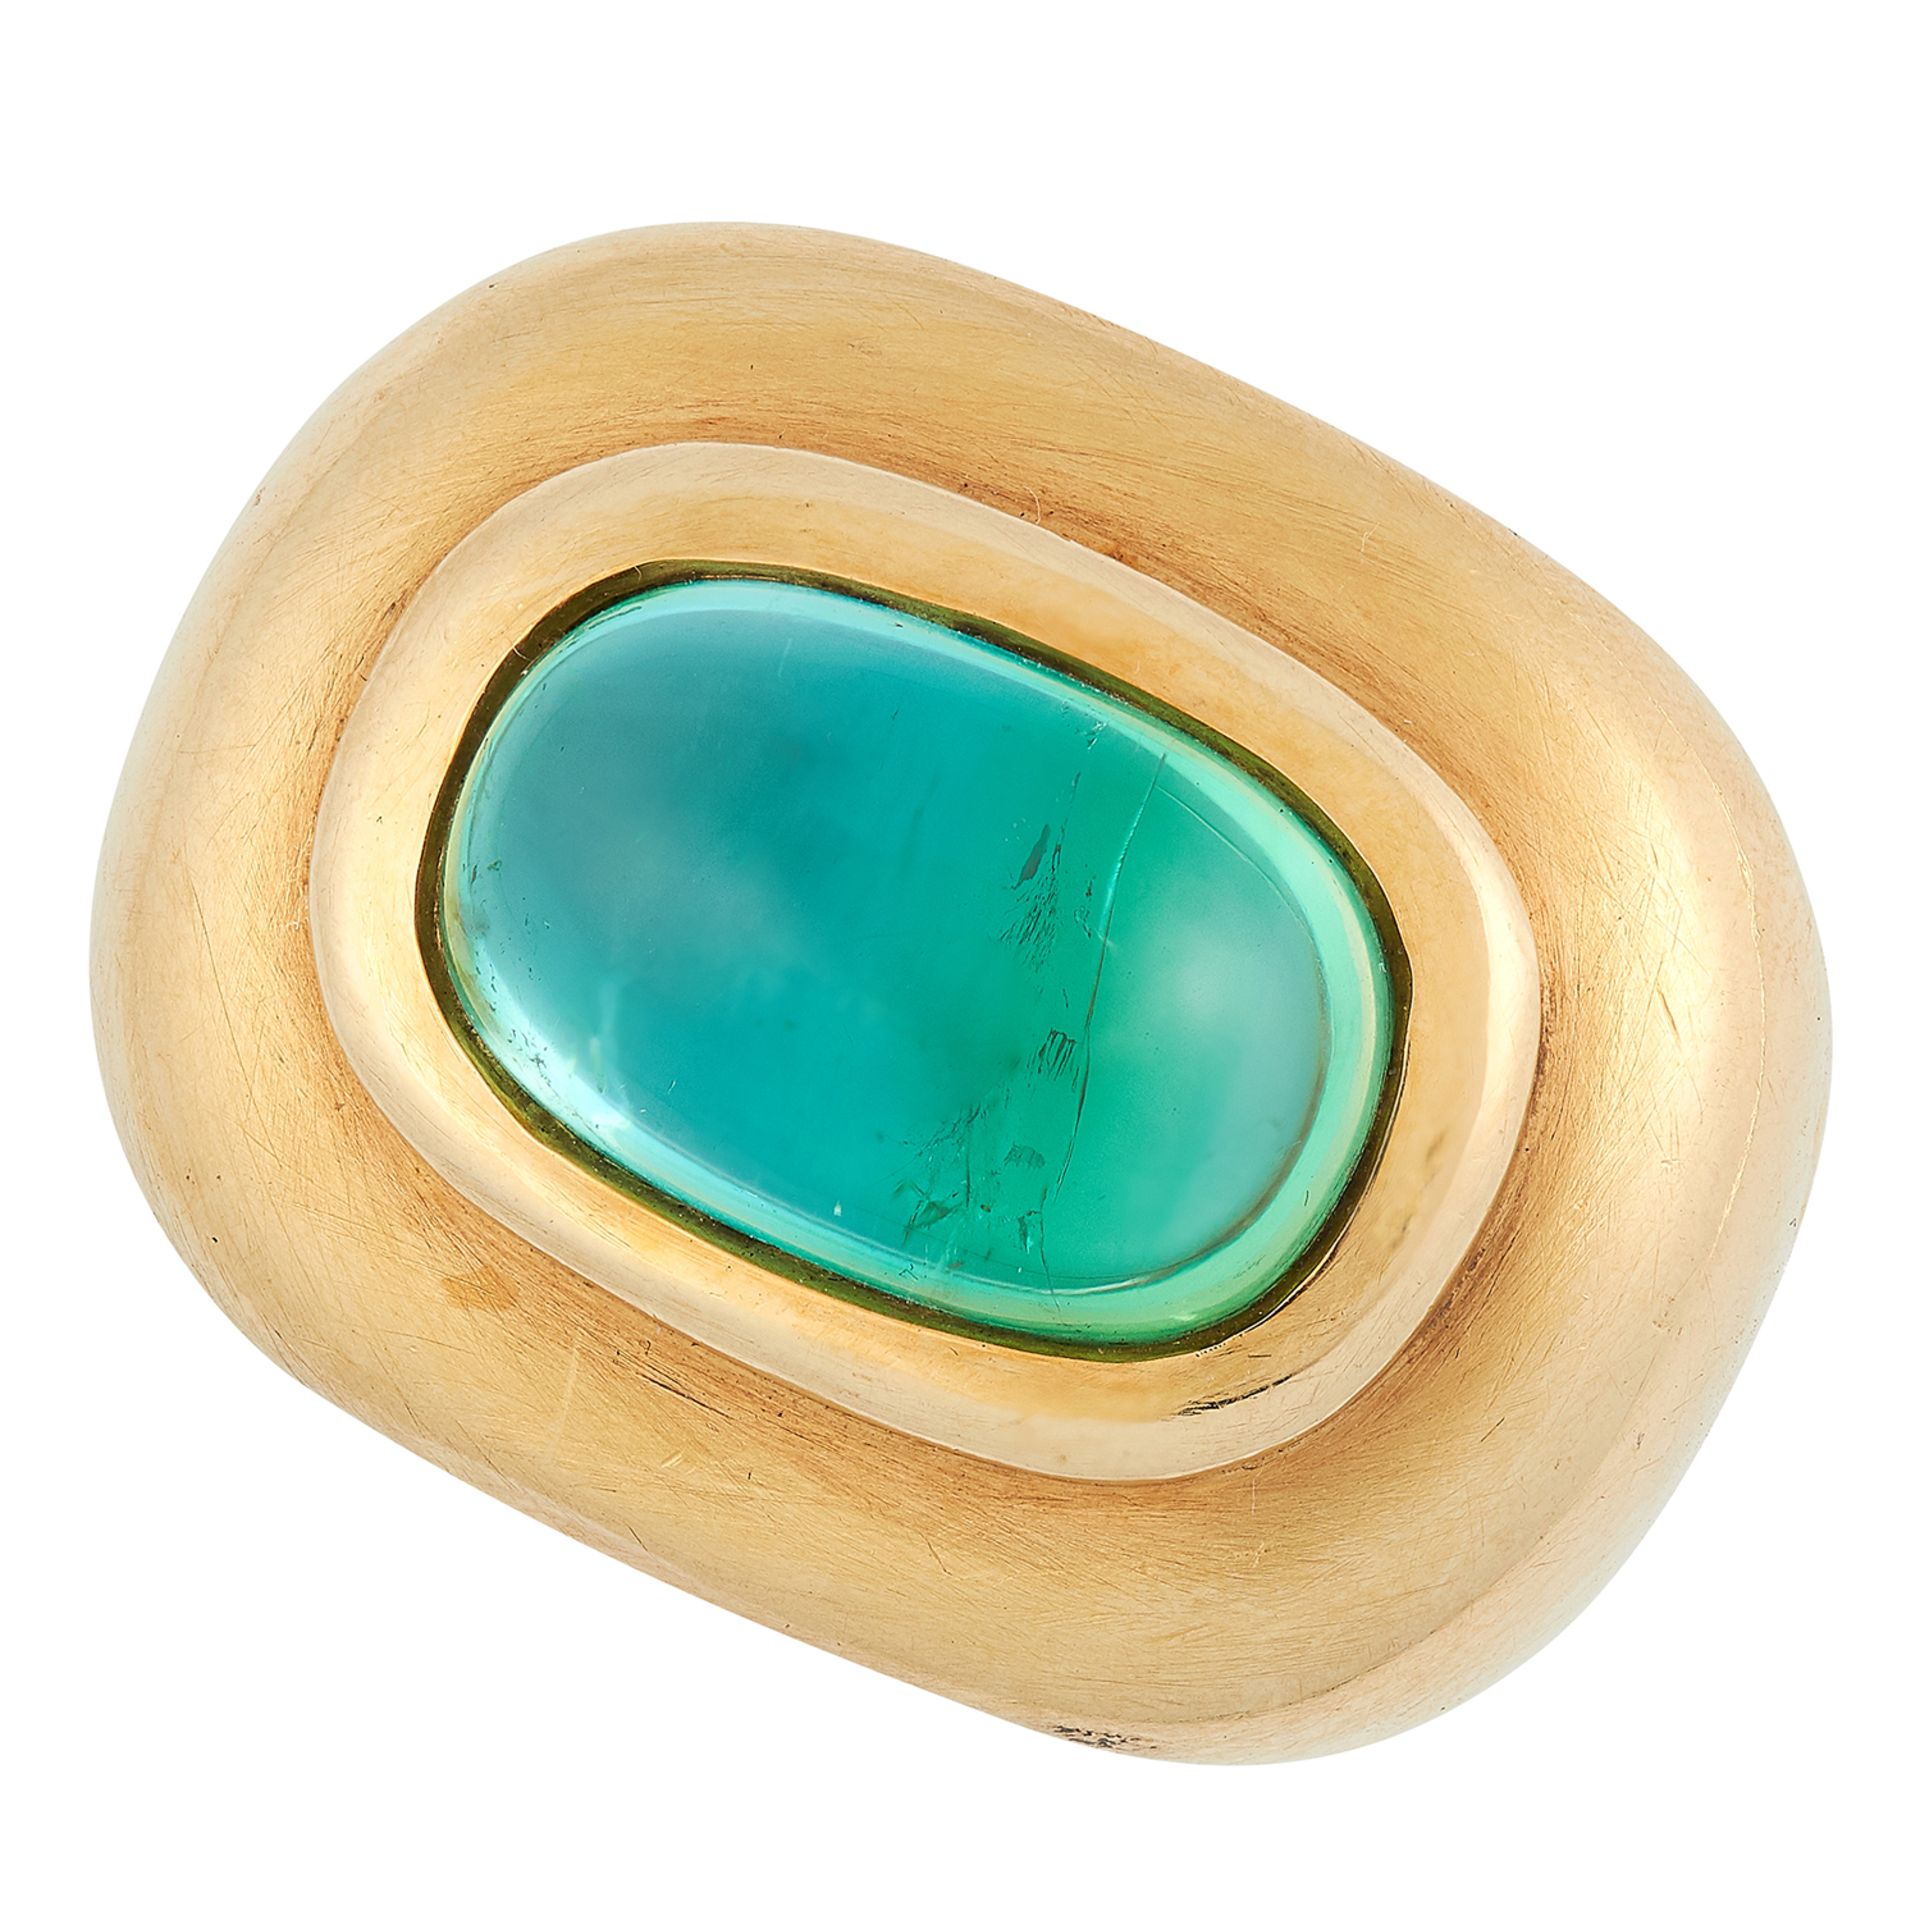 TOURMALINE DRESS RING, TIFFANY & CO designed by Paloma Picasso, the large bombe body set with a